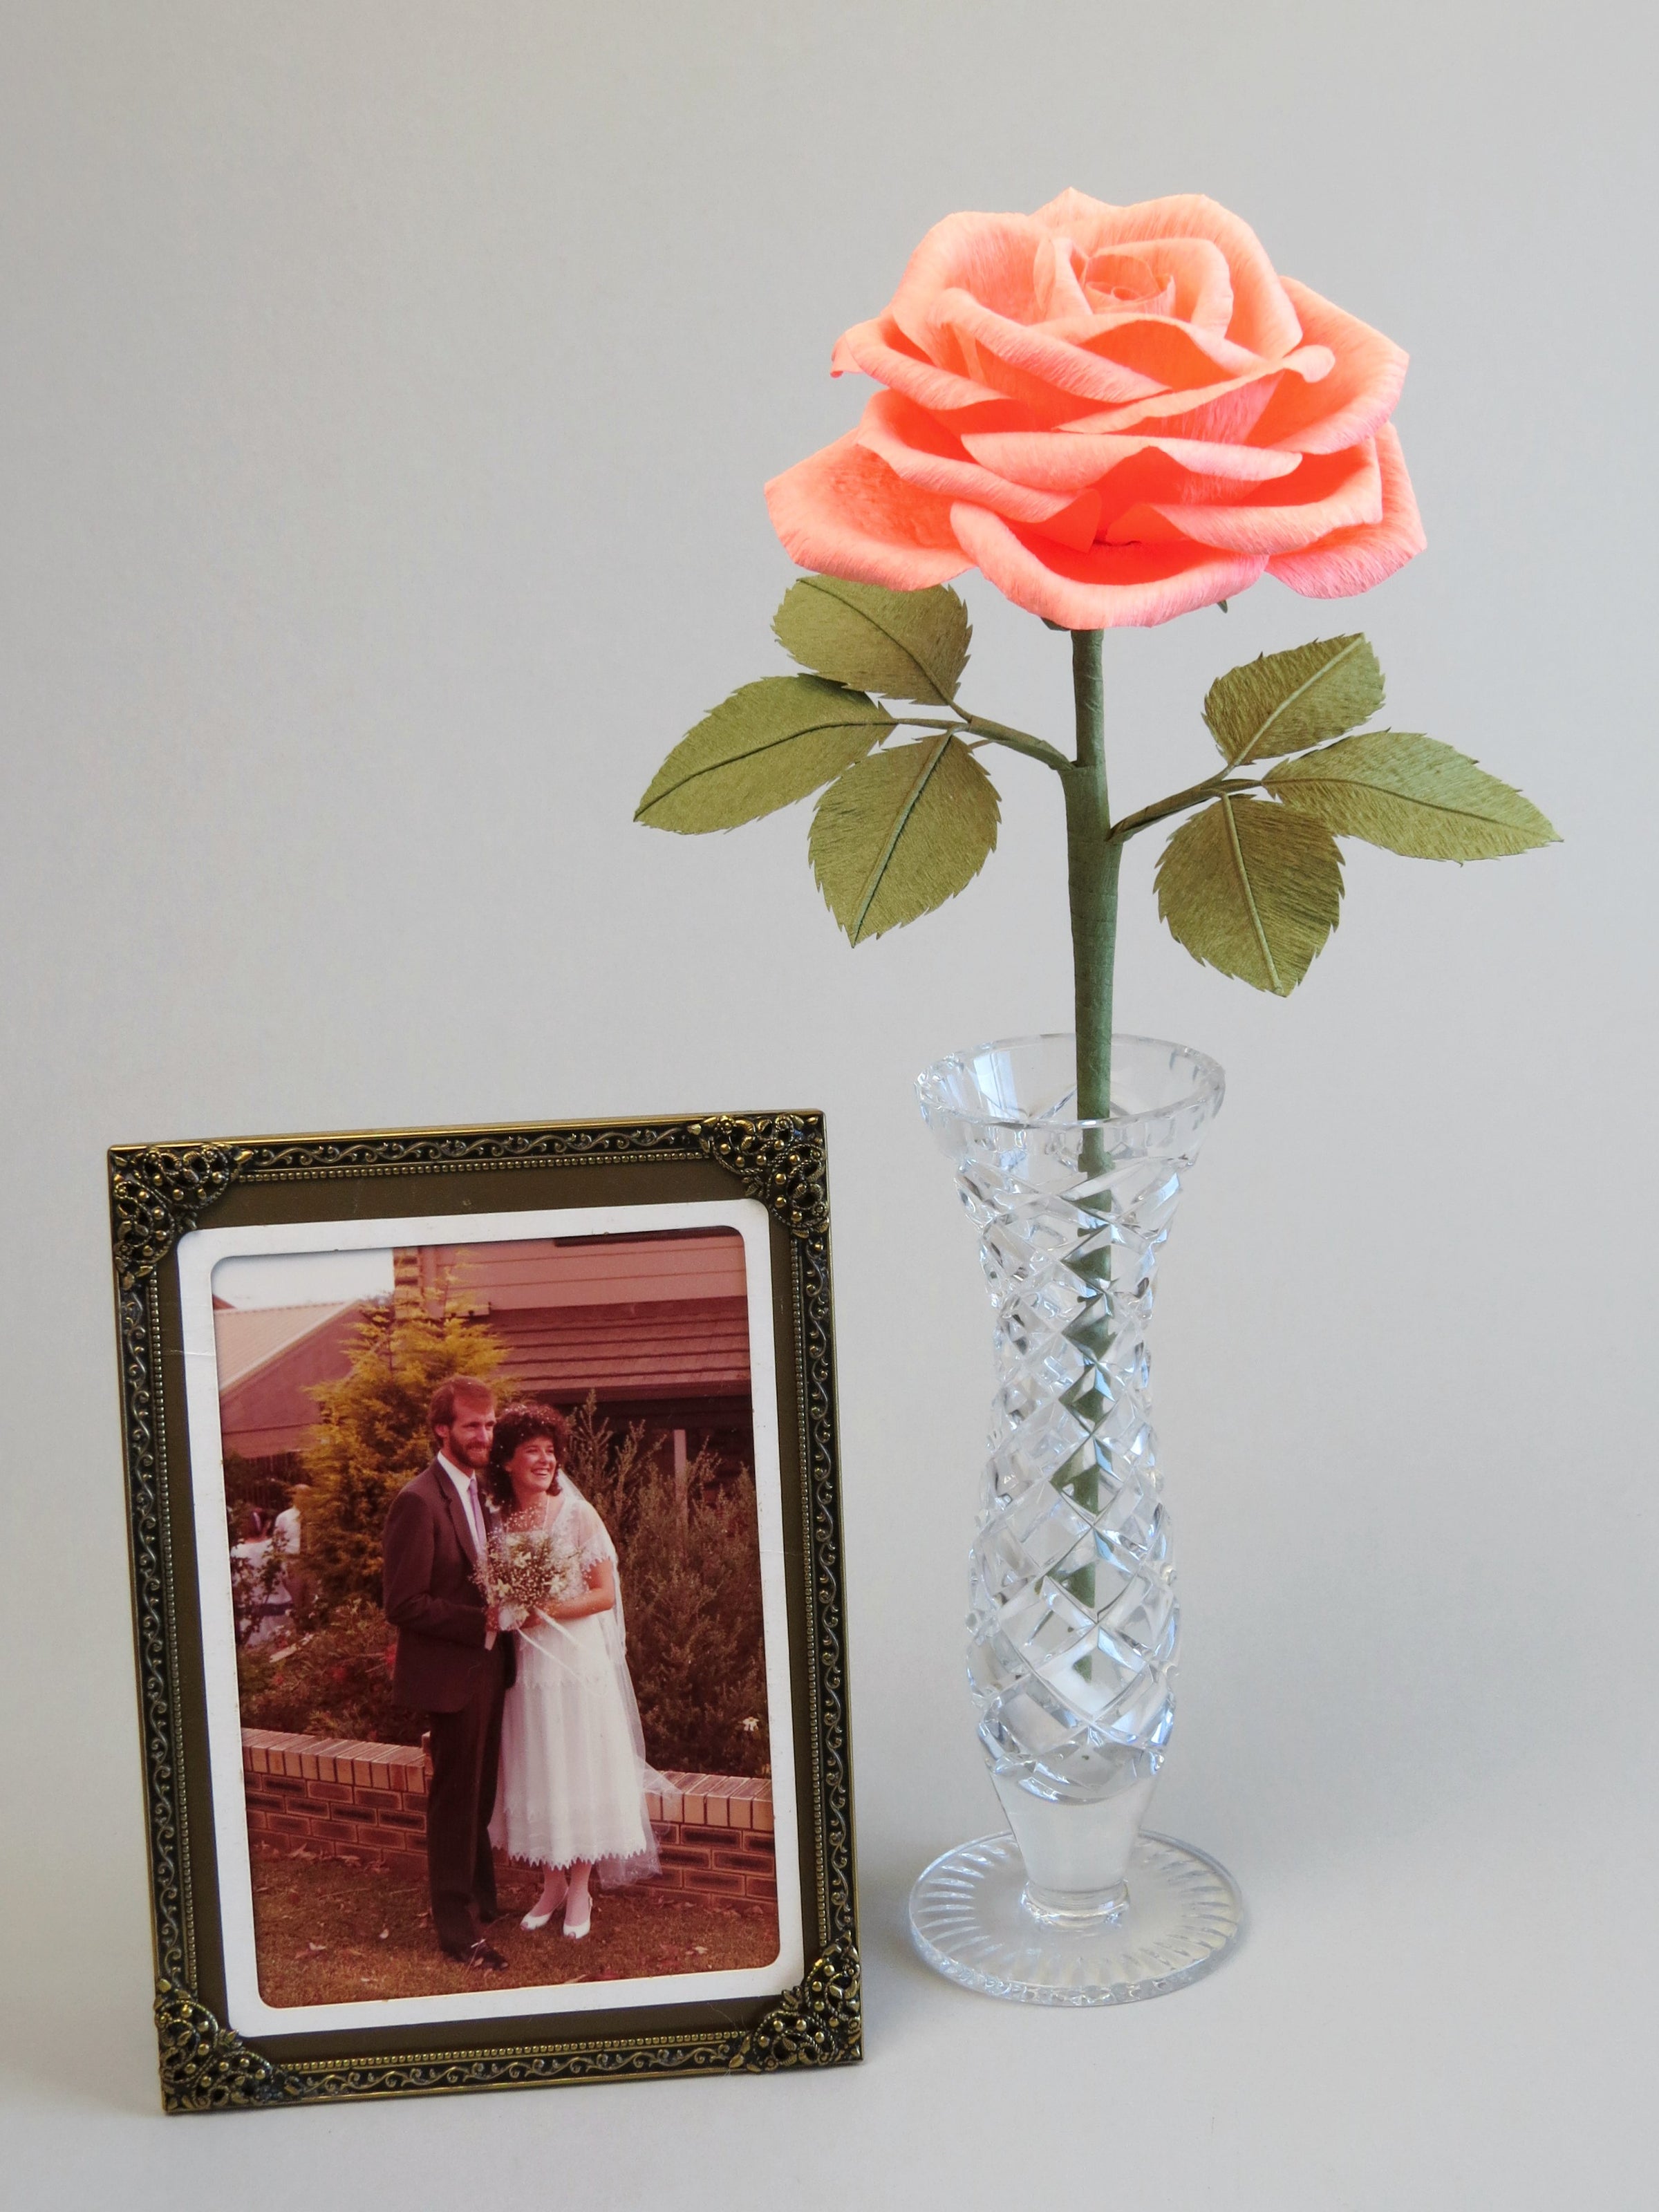 Coral pink crepe paper rose with six olive green leaves standing in a slender glass vase with a thin gold framed retro wedding photo of a happy 1980s does 1920s inspired bride and groom in a garden standing beside it